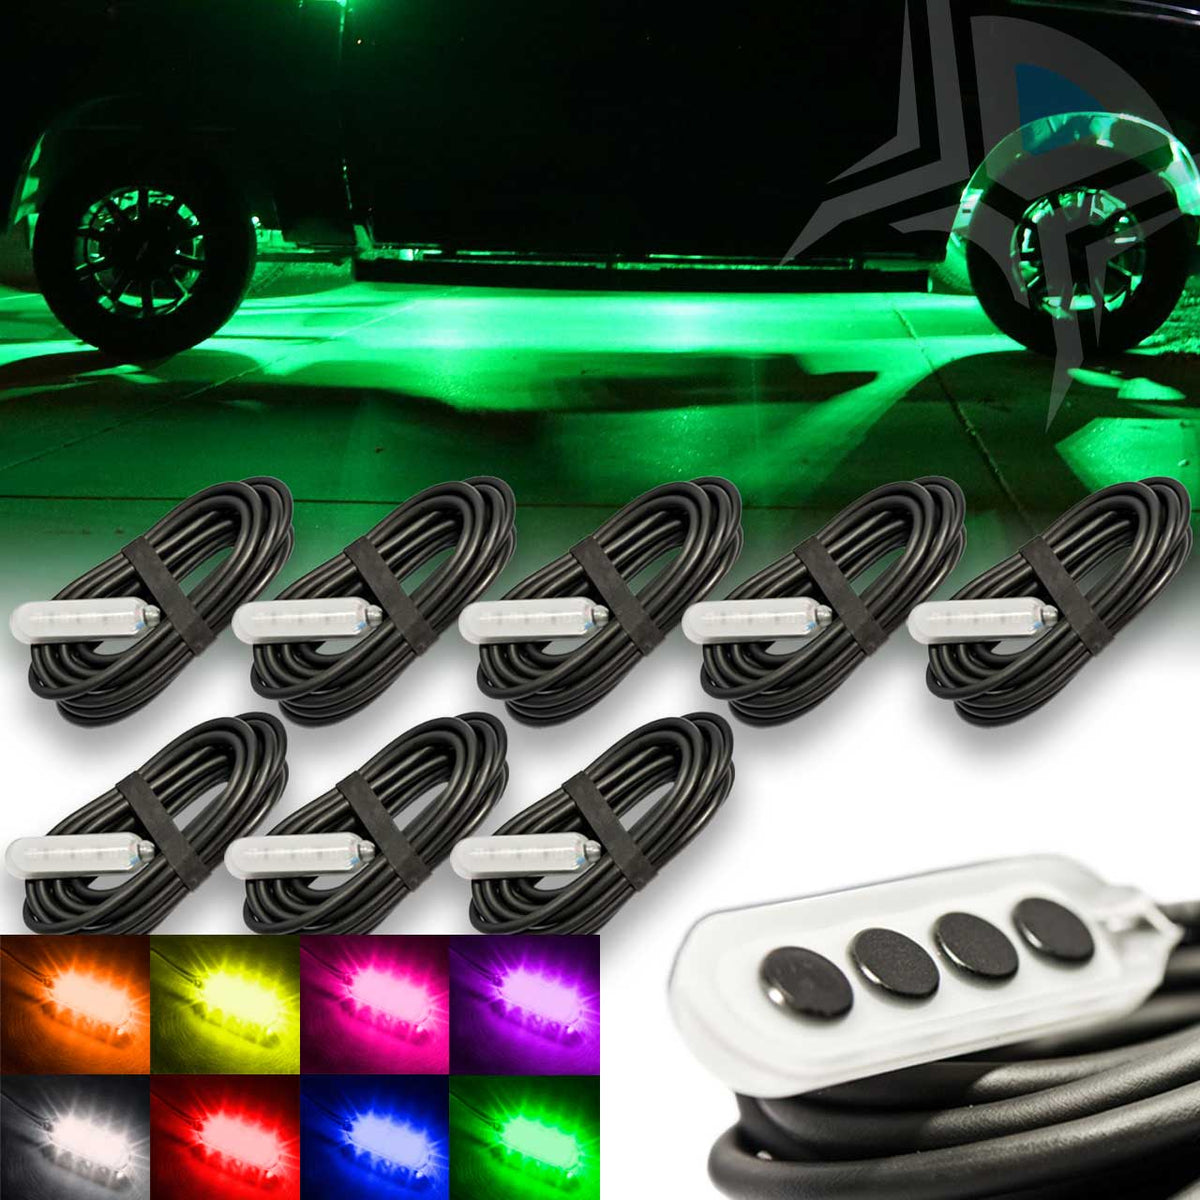 MAX RGB Color Changing LED Rock Light Kit for Trucks 8 Piece Ground Coverage